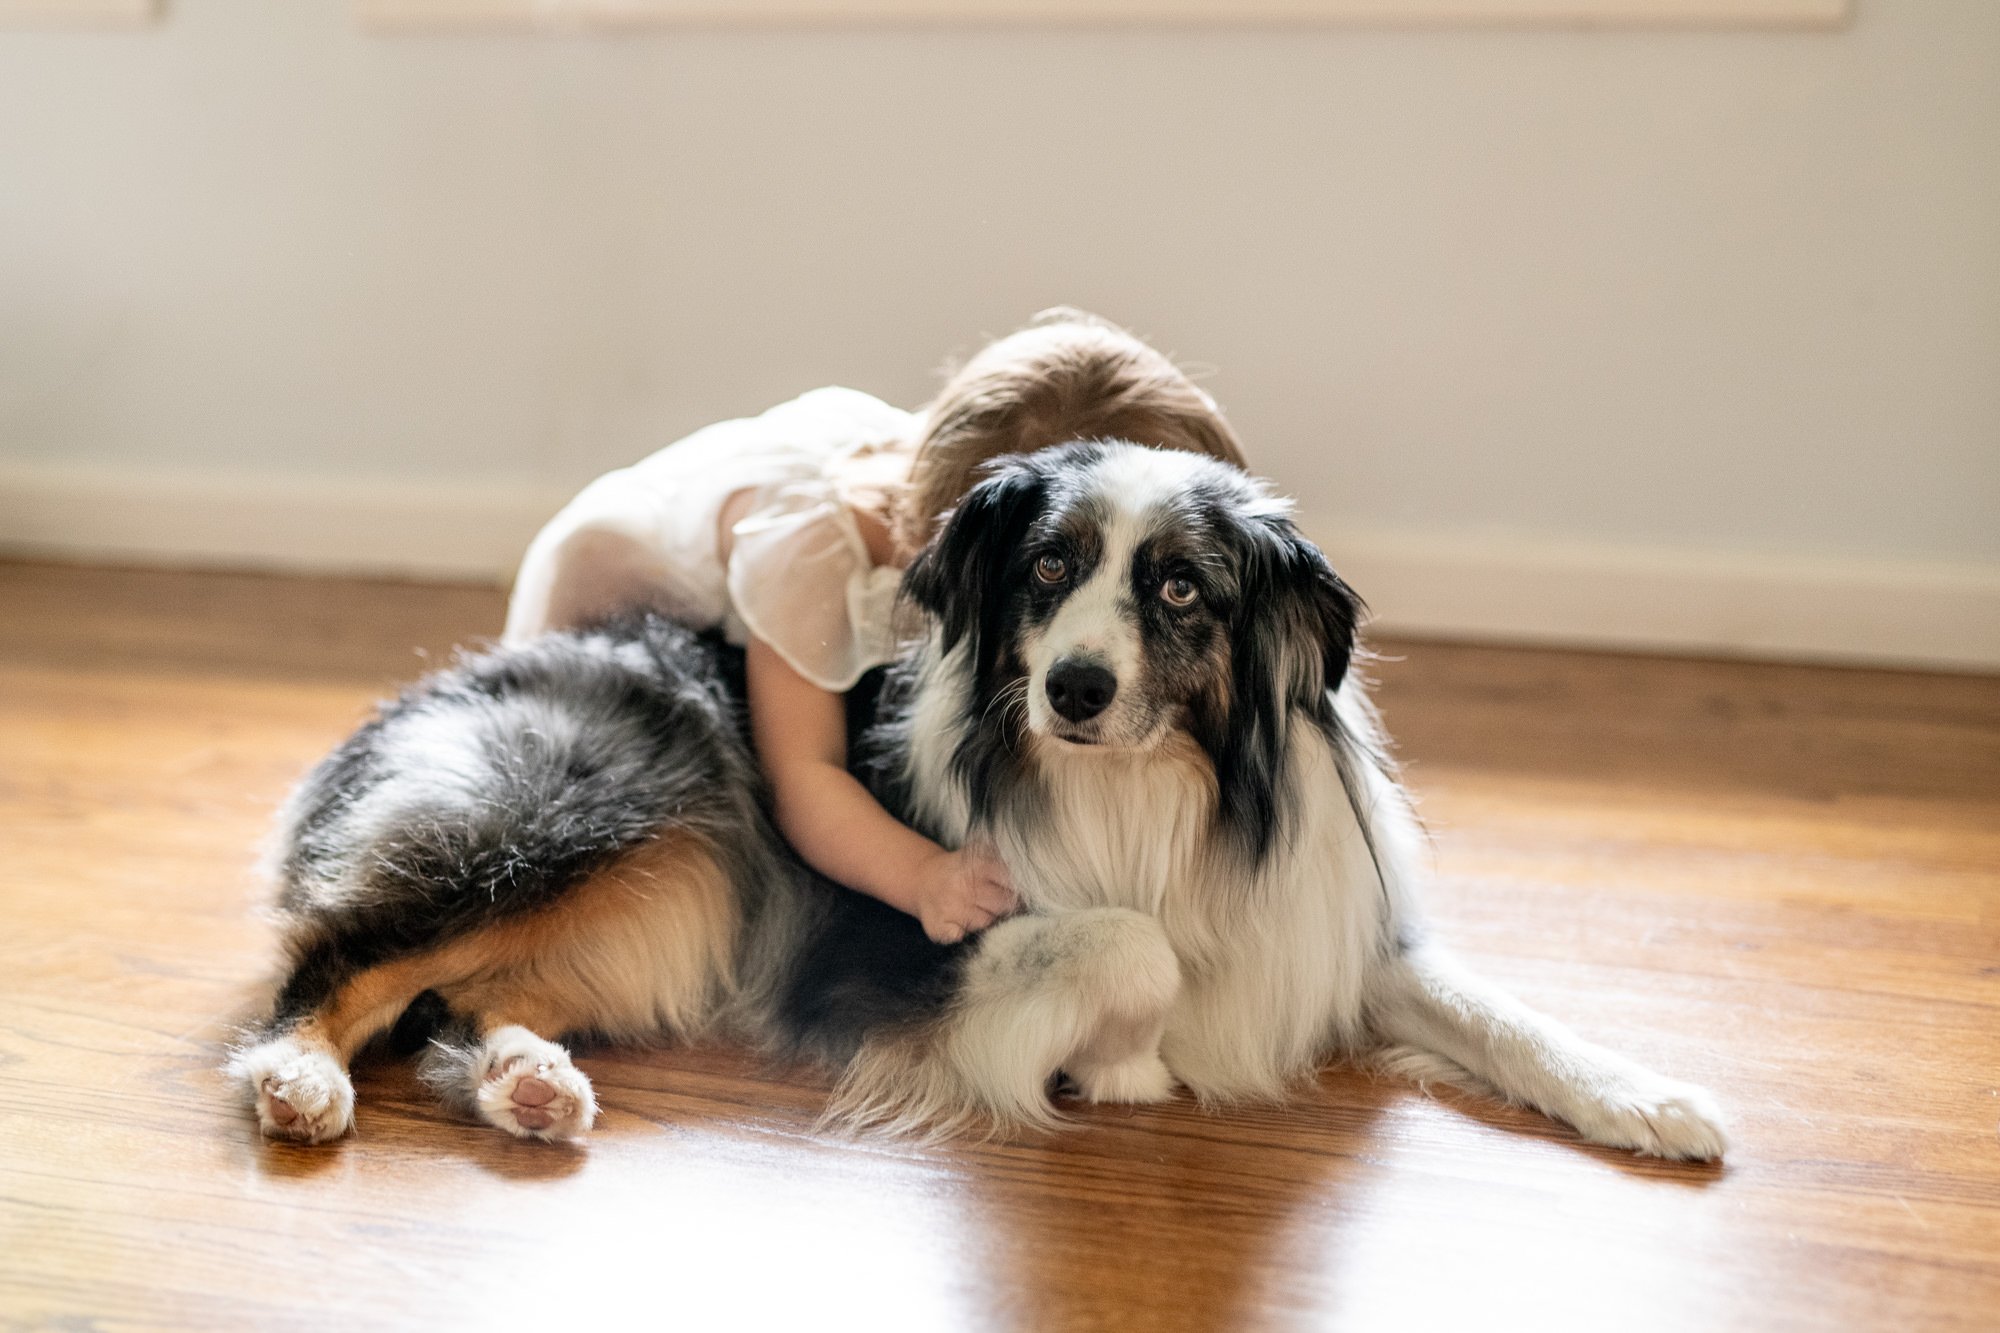  Toddler girl hugs her Australian shepherd pet from behind in a cute and candid pose during an in-home newborn family portrait session. #candidposeinspo #newbornphotography #shorthillsphotographer #familyphotographersinnewjersey #inhomeportraits #new